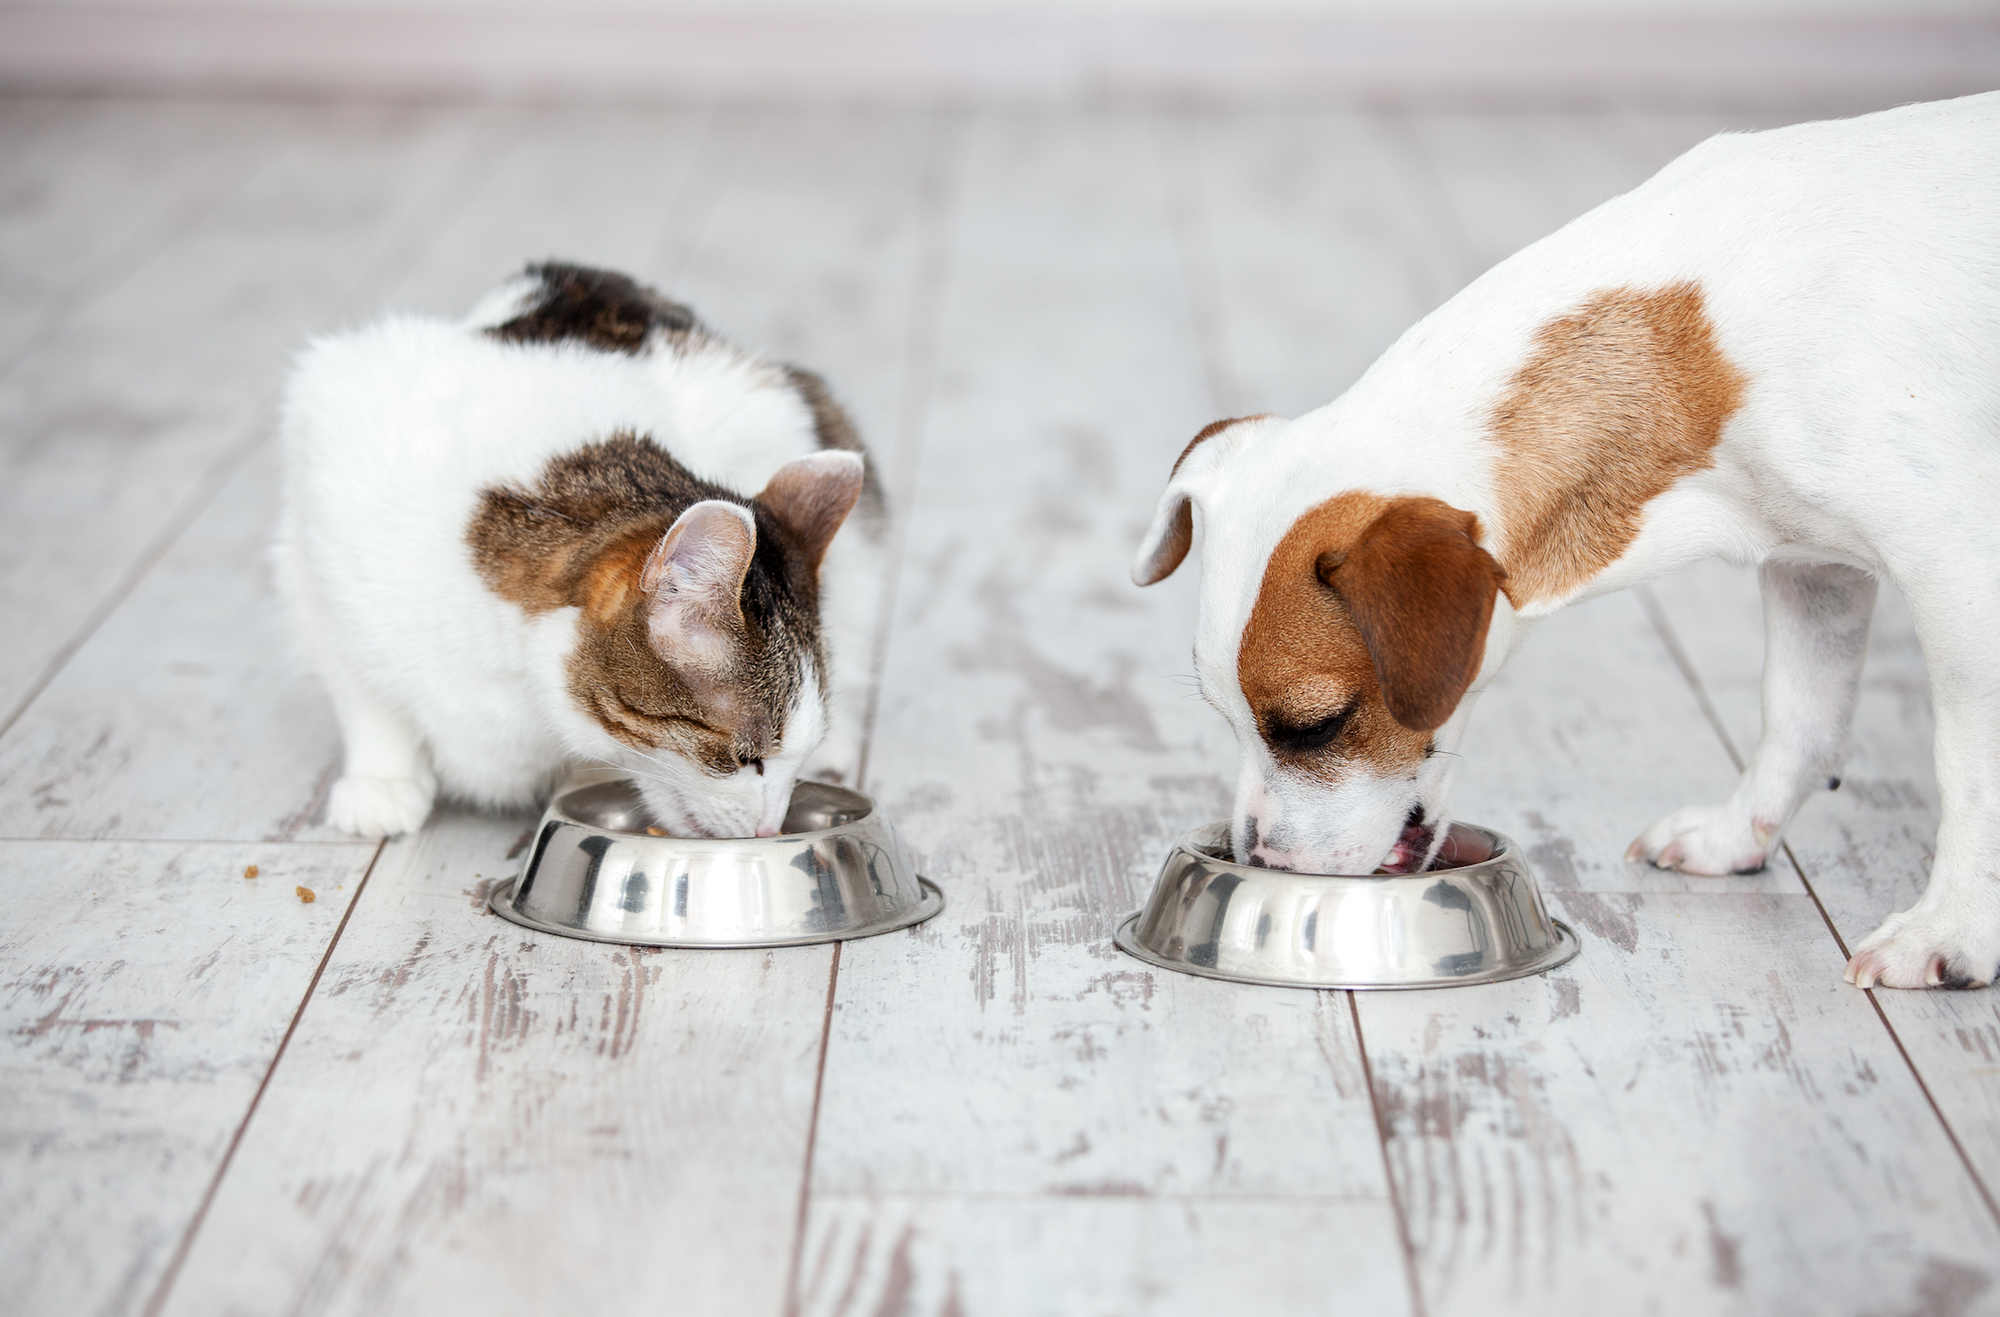 Cat and dog eating from bowls indoors.